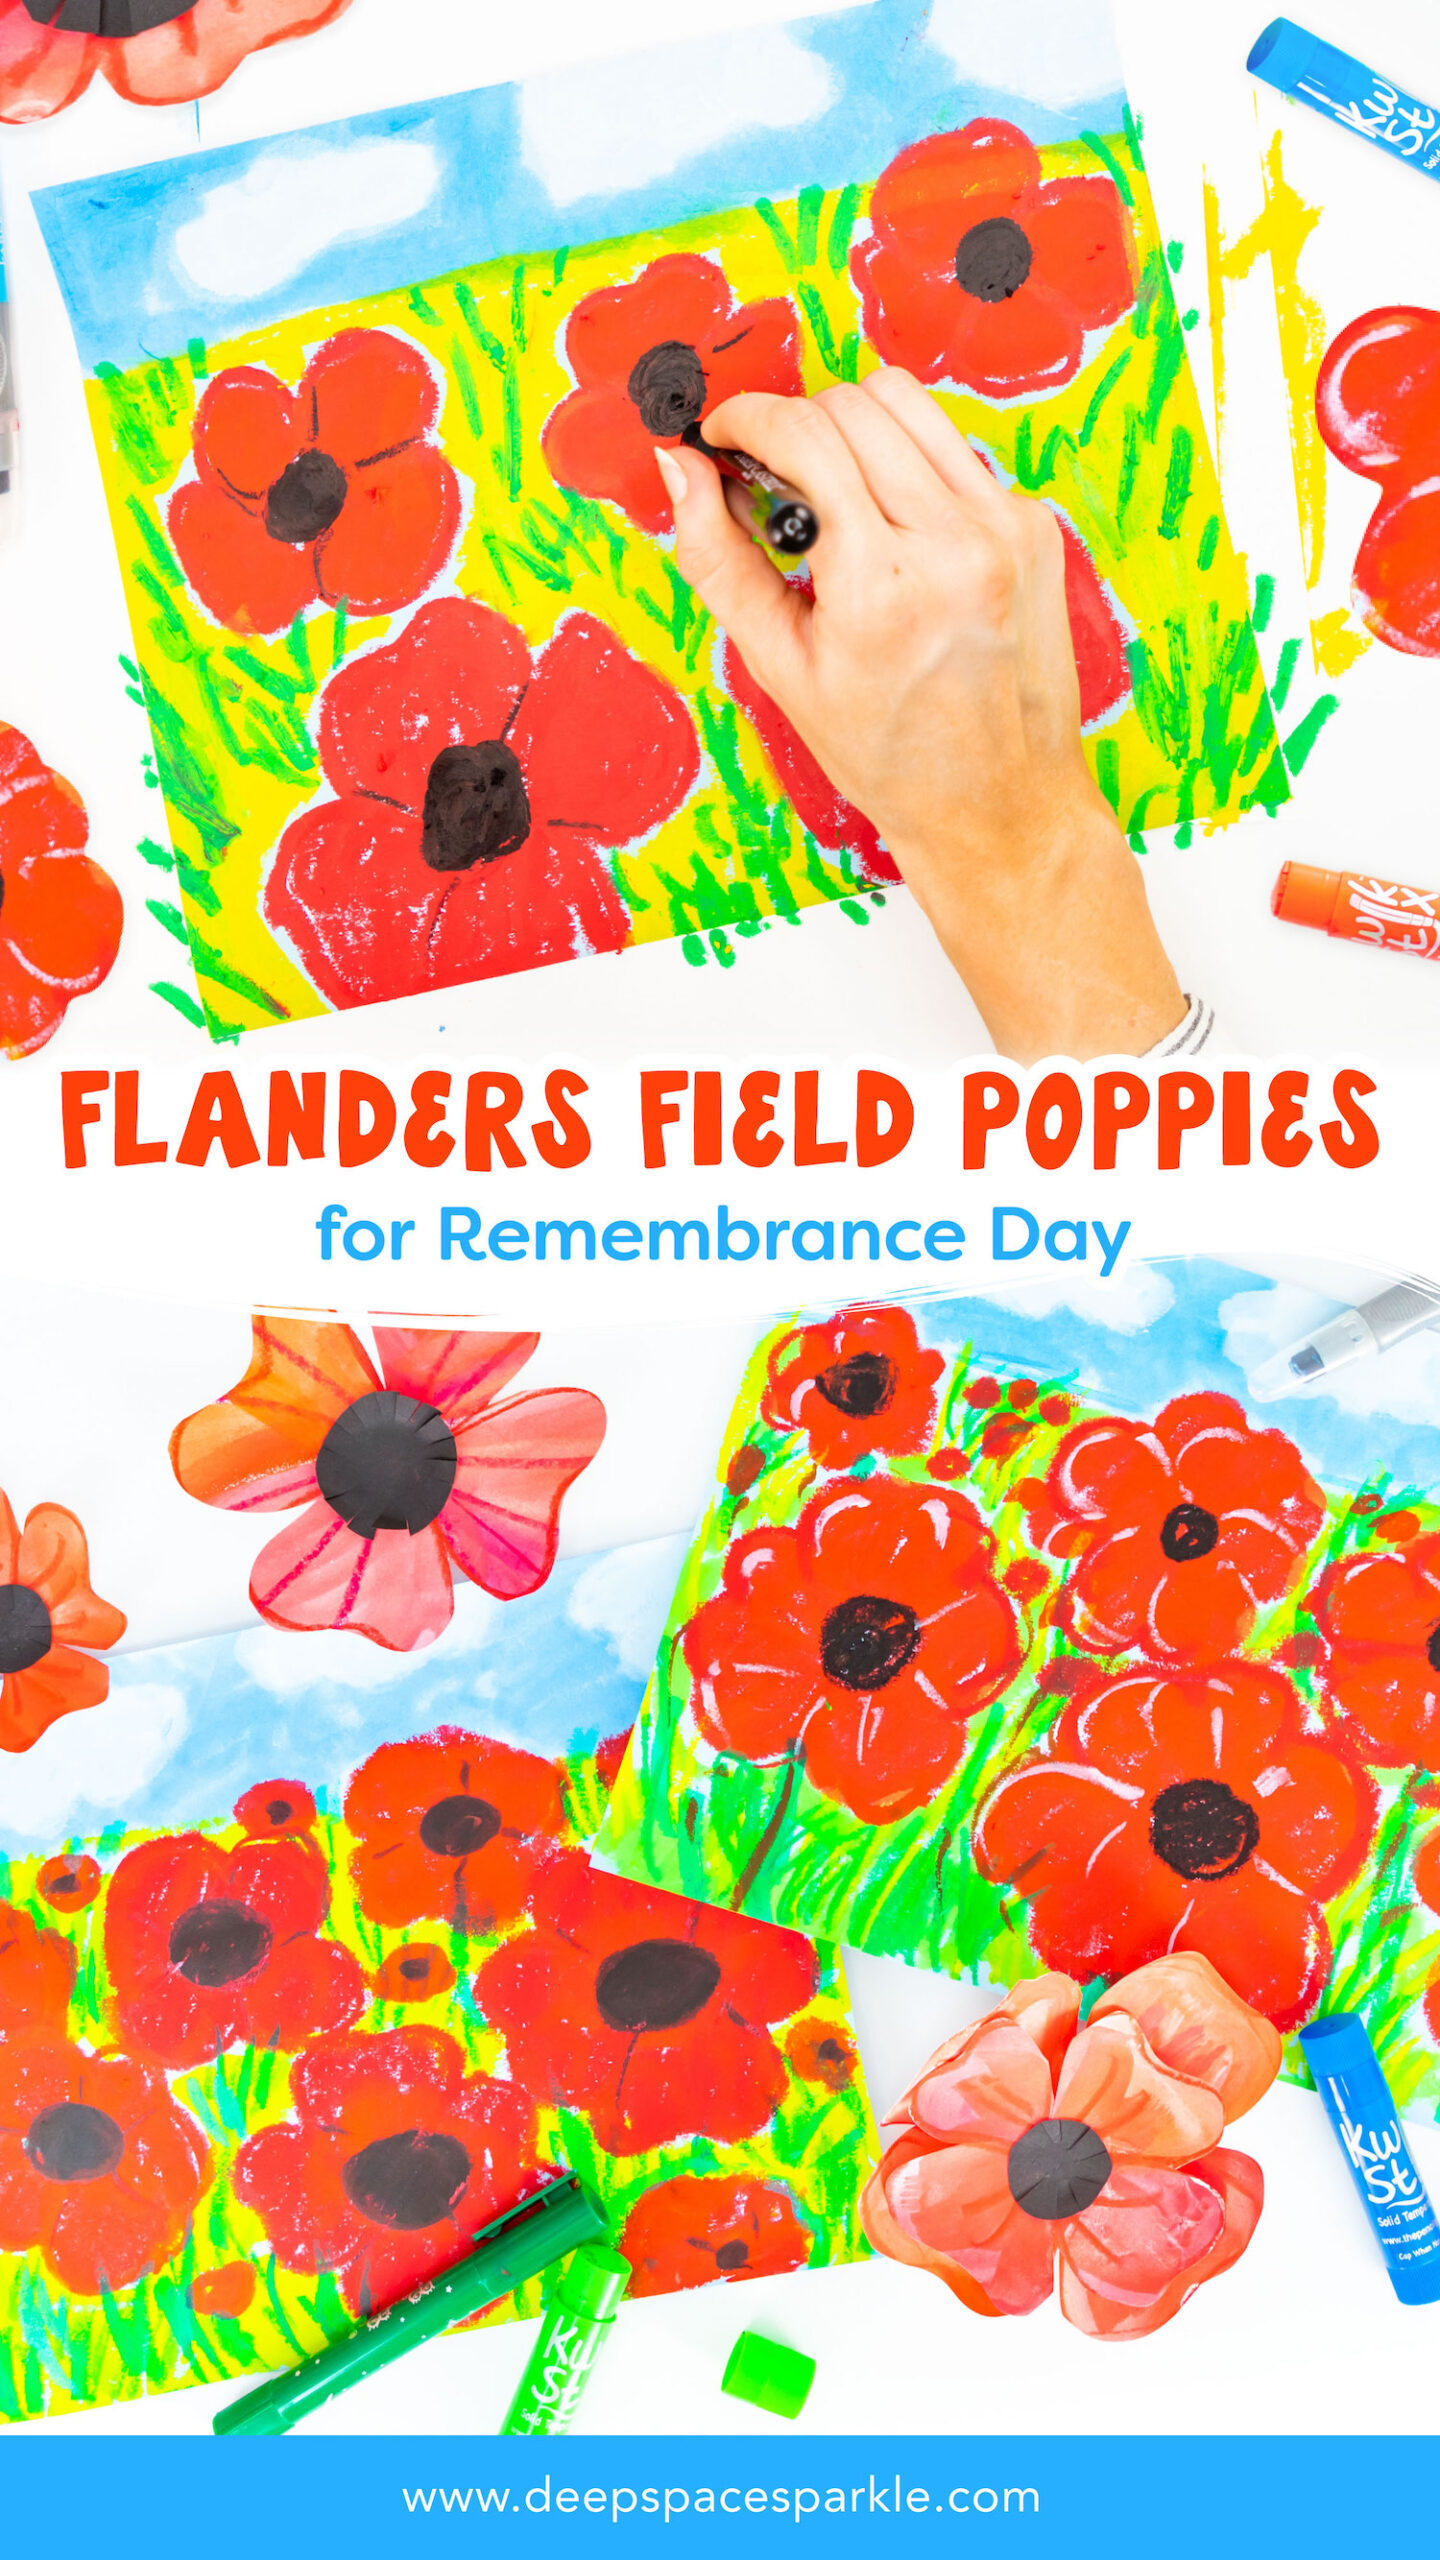 Flanders Field Poppies for Remembrance Day